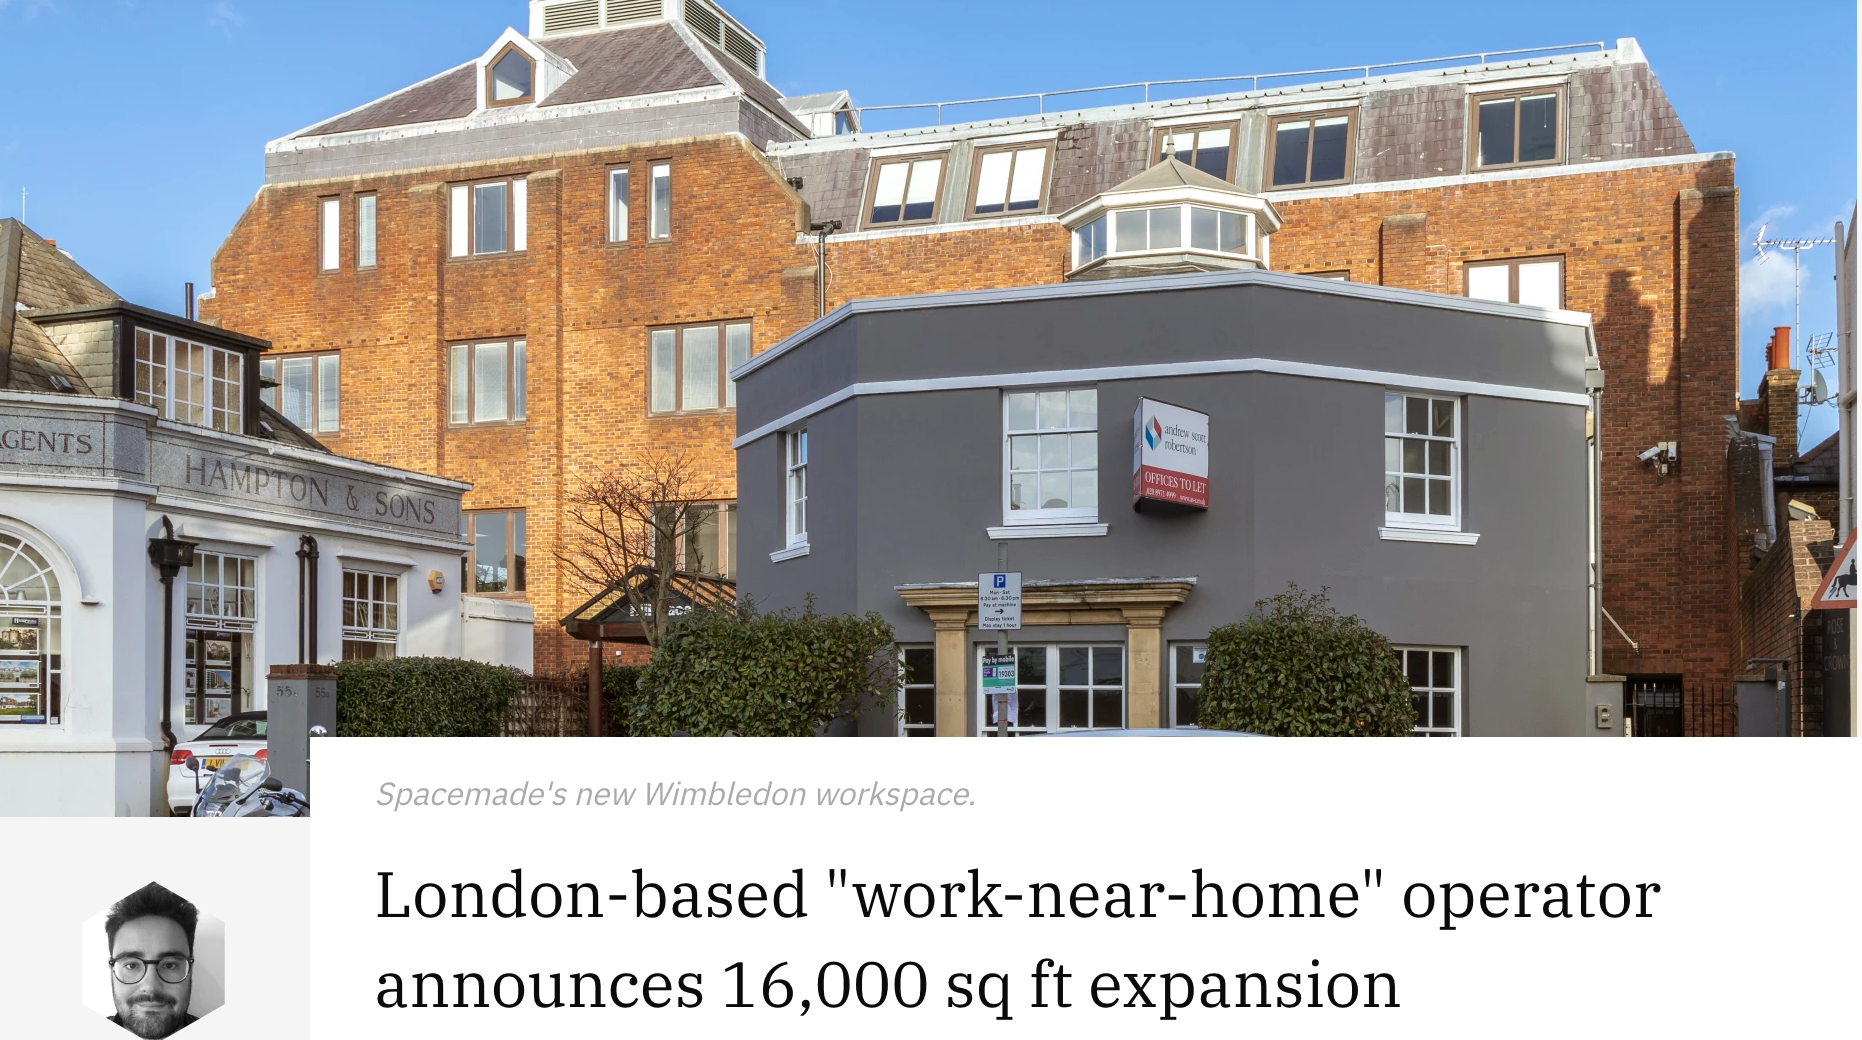 Press: London Based Work-Near-Home Operator Announces 16,000 sq ft Expansion – BDaily